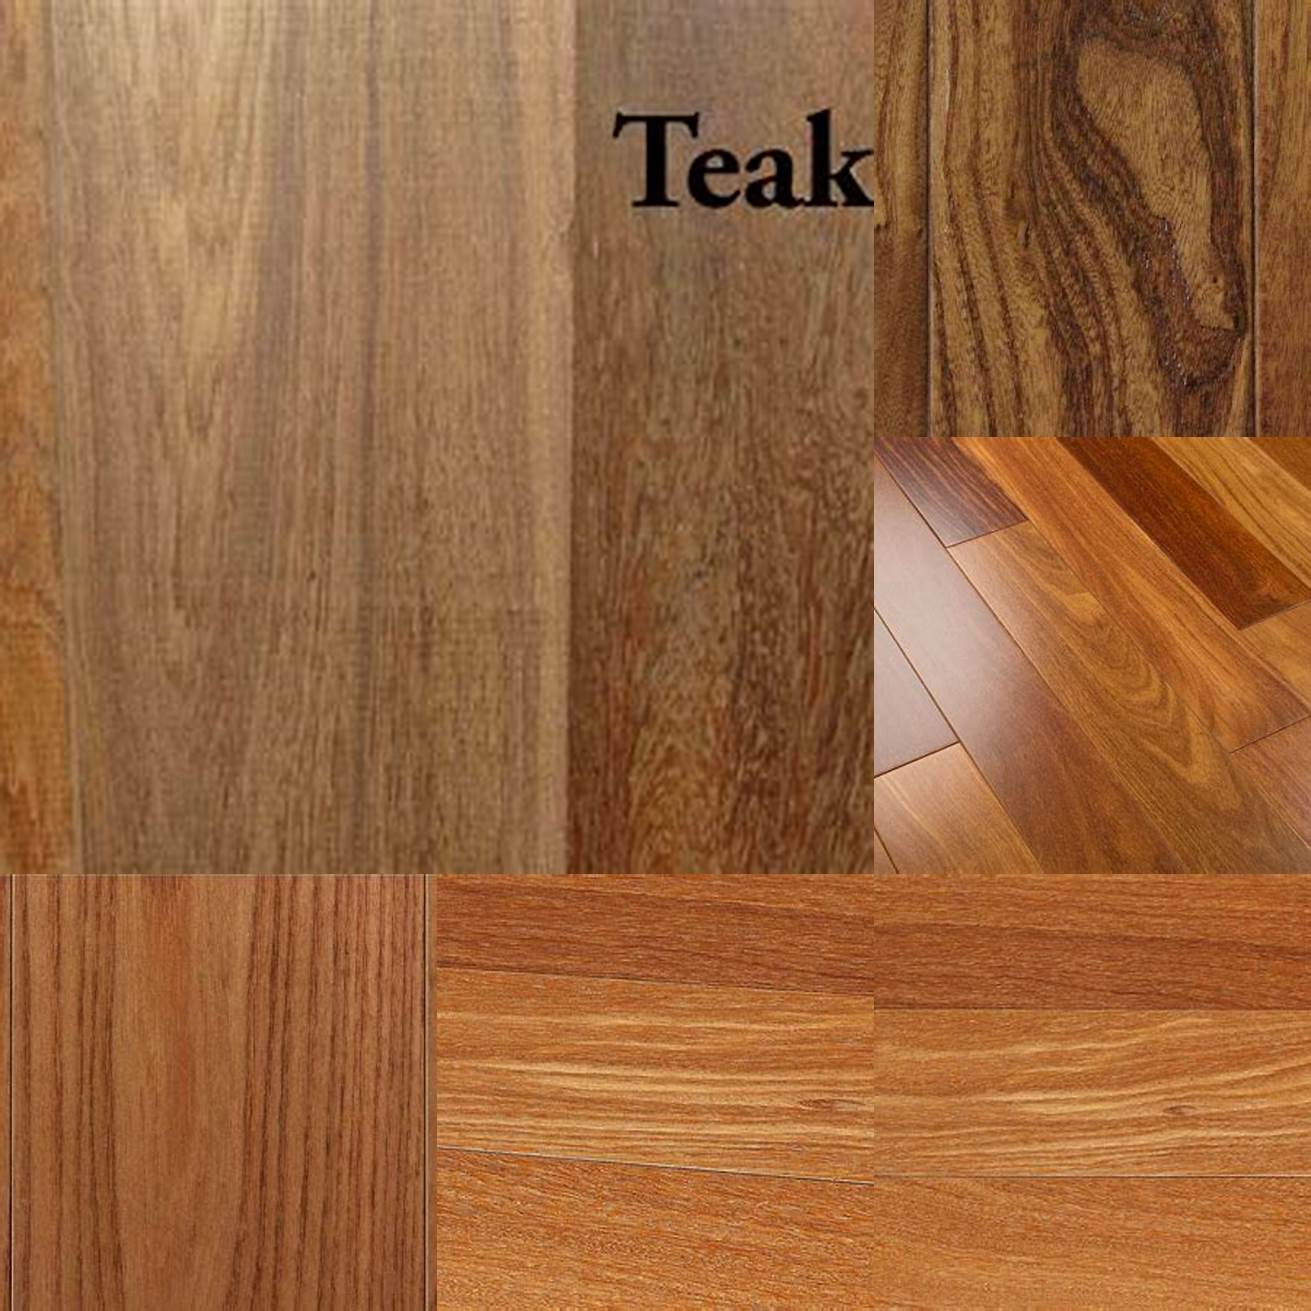 Teak Teak is a hardwood that is known for its durability and resistance to moisture It has a rich dark color that can add an elegant touch to a bathroom